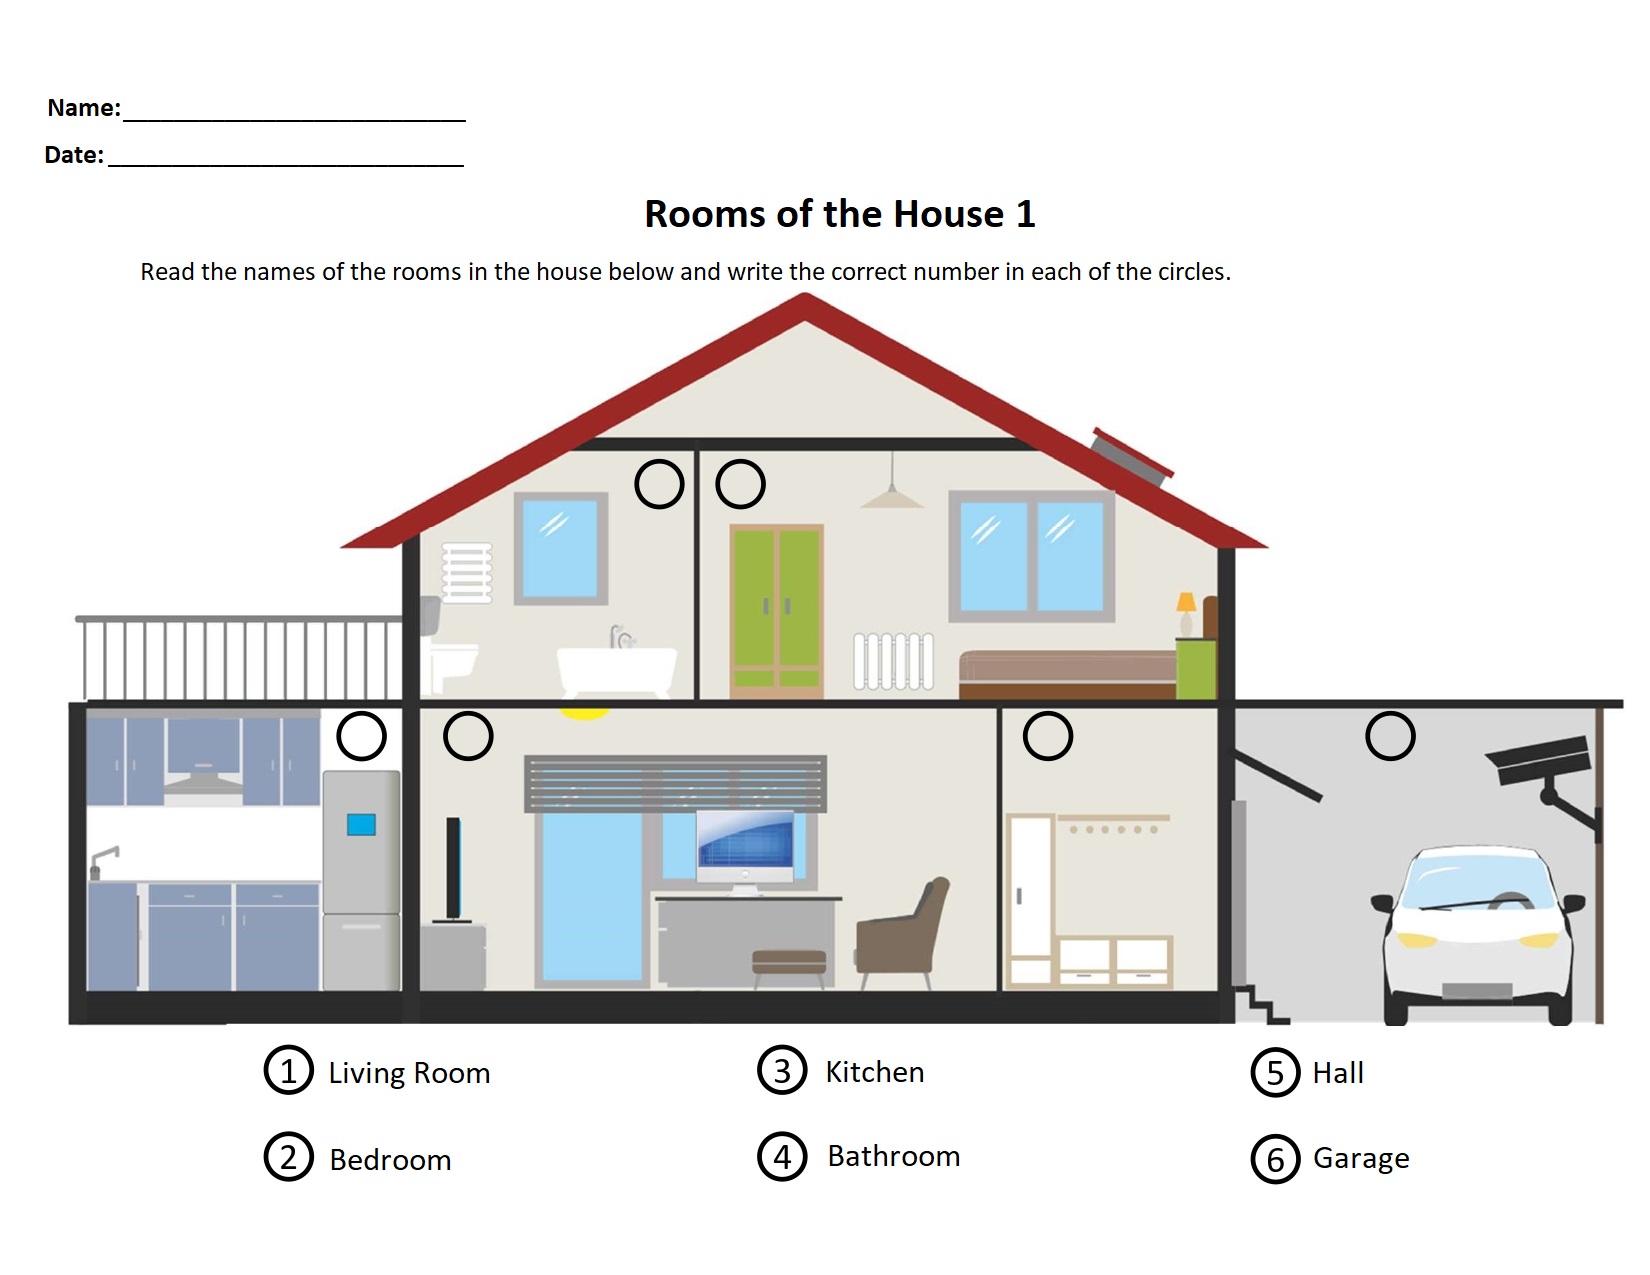 Rooms of the house 1.jpg